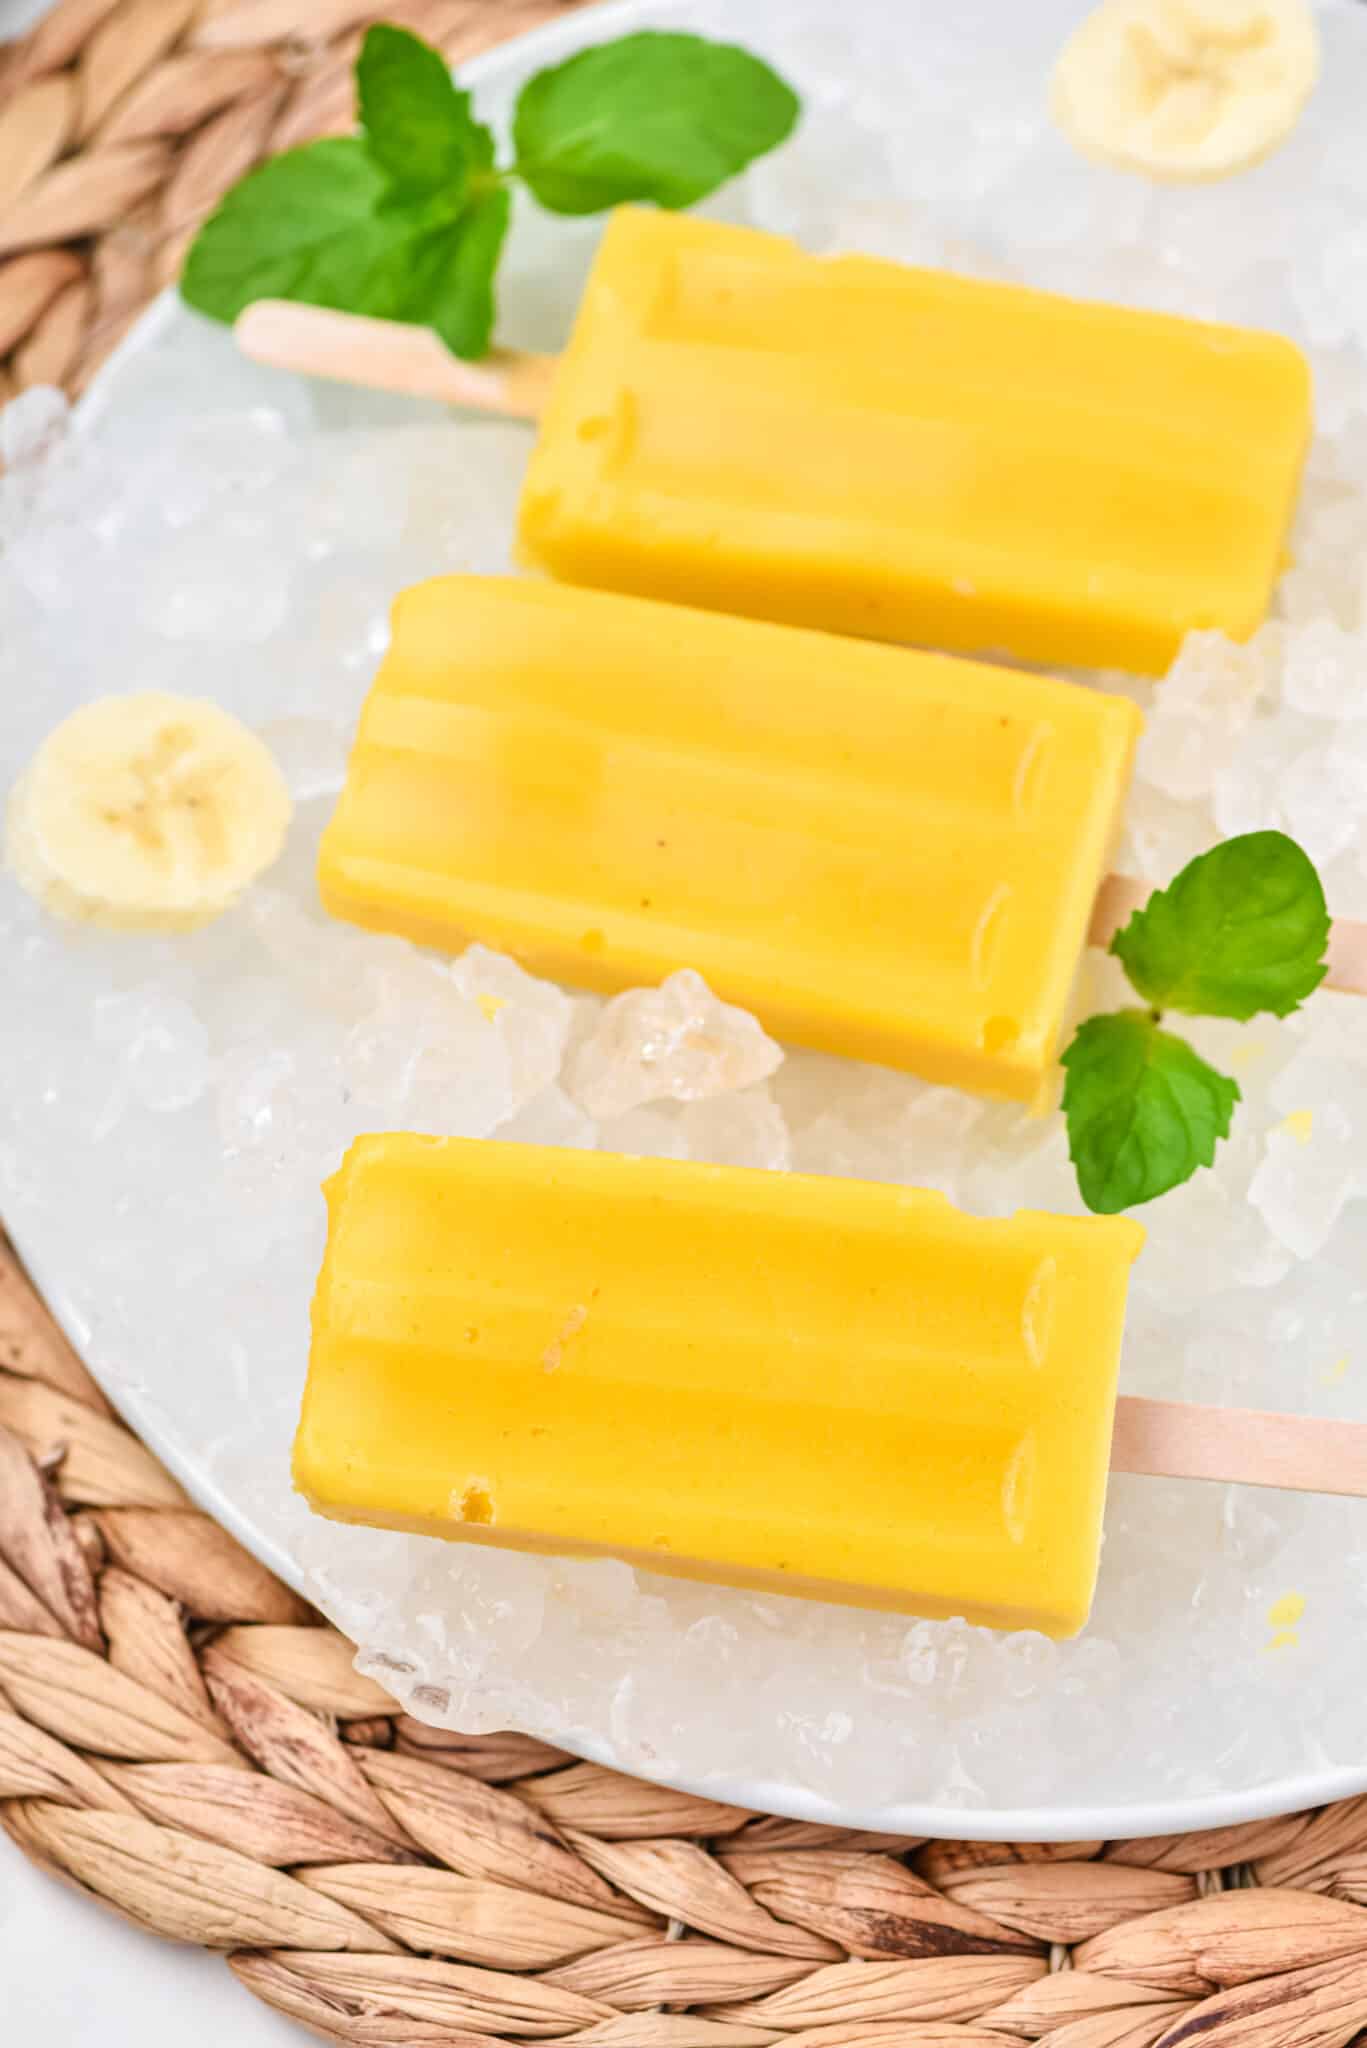 Mango popsicles set out on a plate of ice cubes.